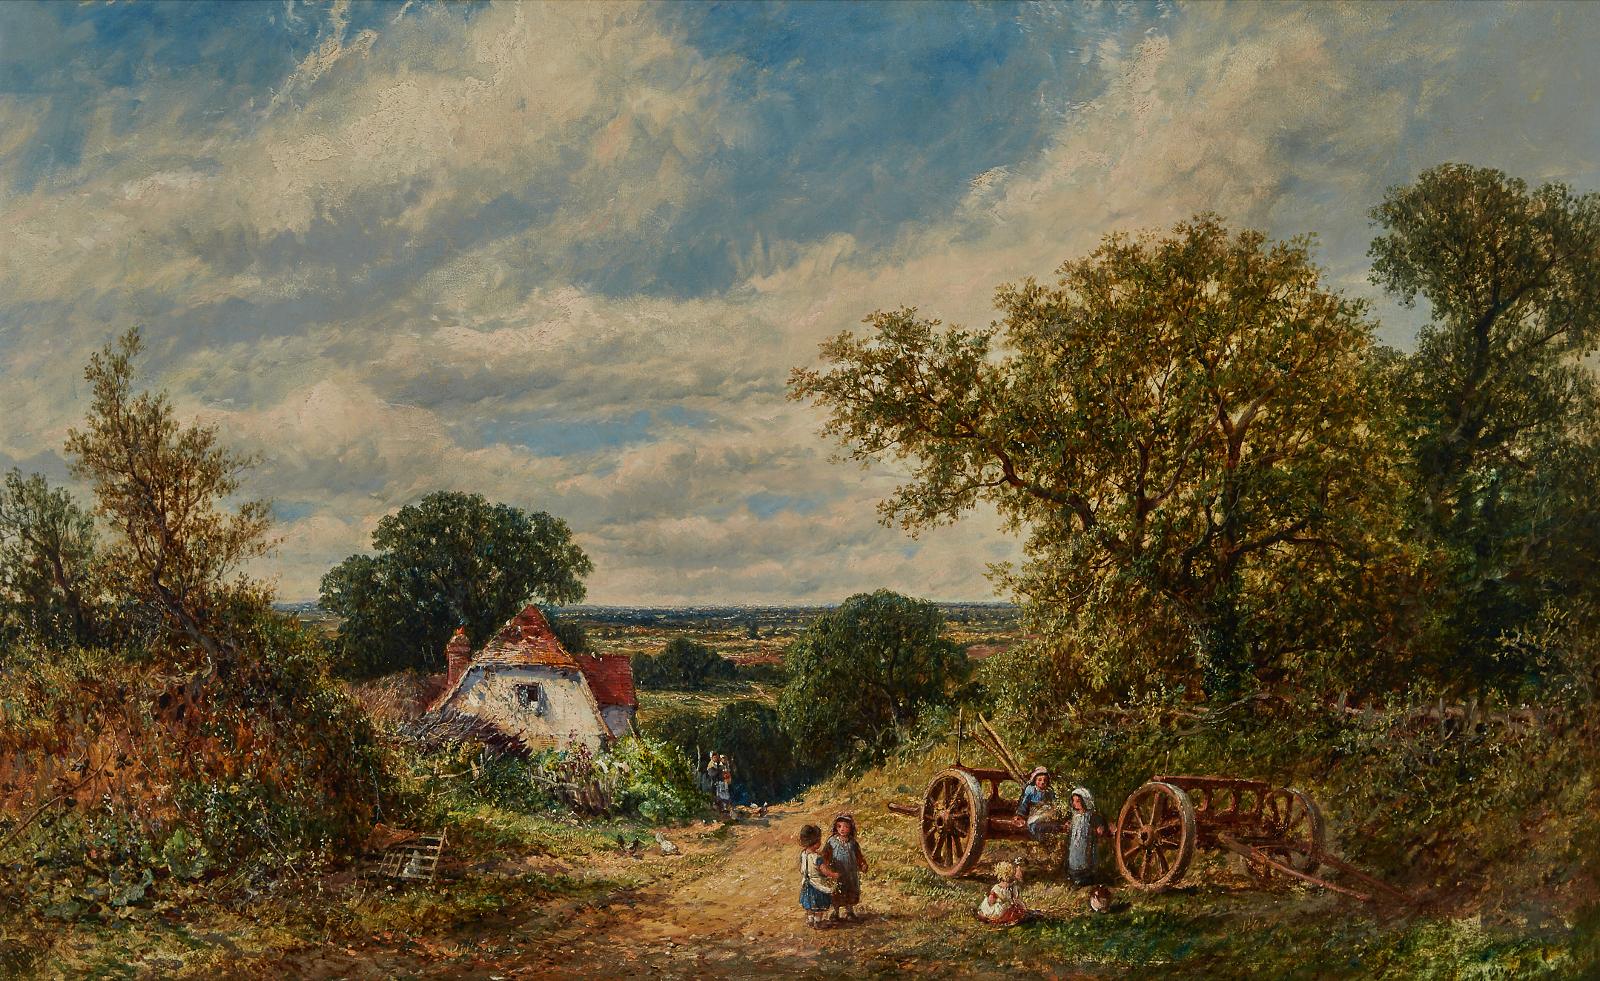 James Edwin Meadows (1828-1888) - Landscape In Sussex With Farm Wagon